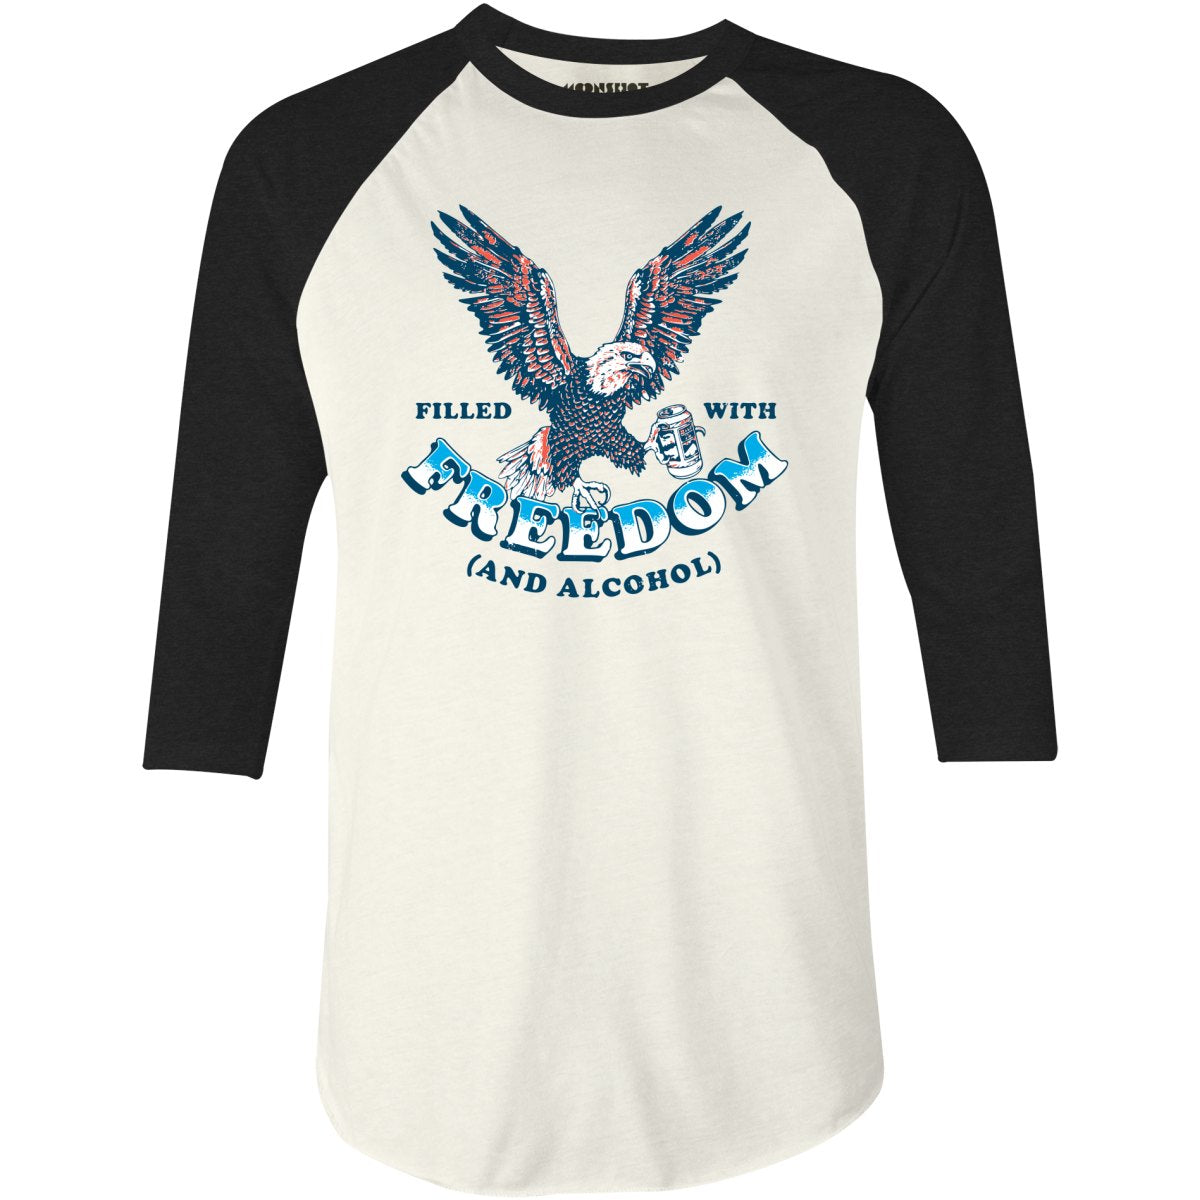 Filled With Freedom - 3/4 Sleeve Raglan T-Shirt